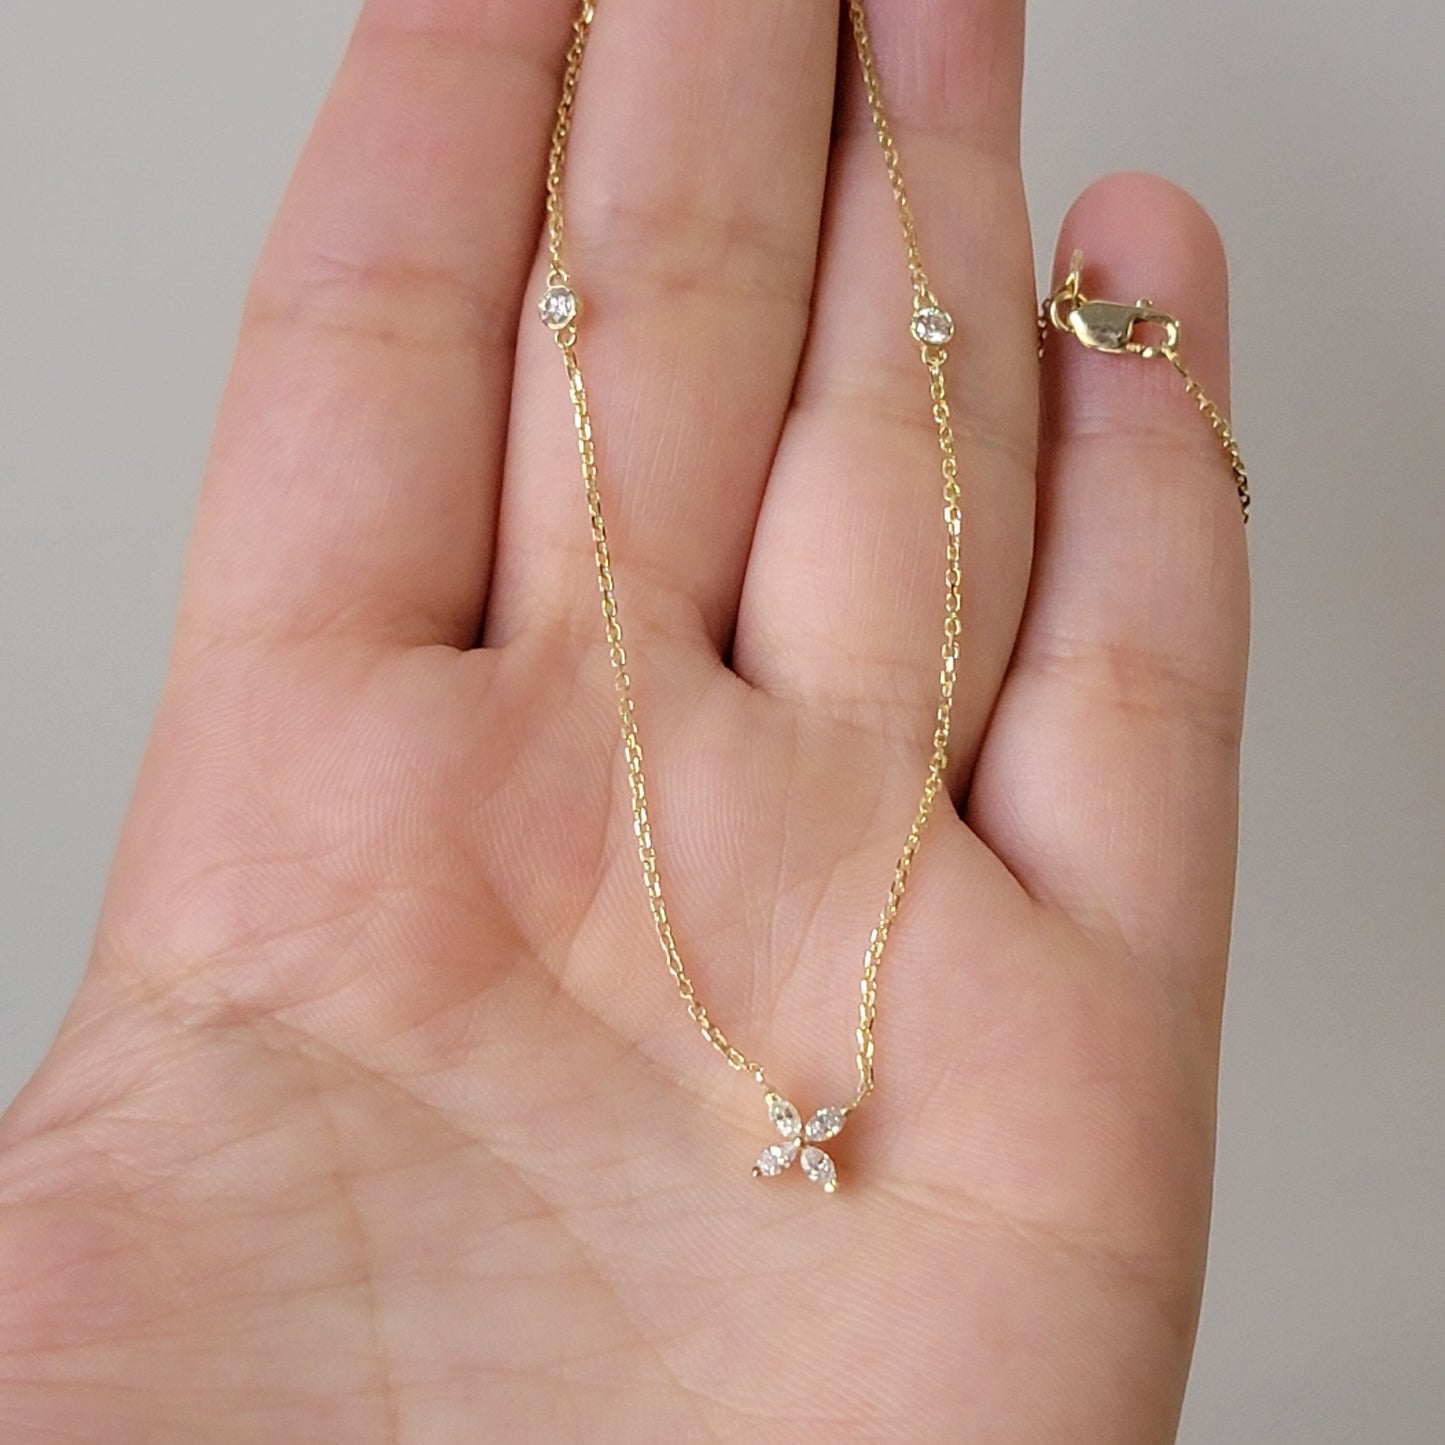 Marquise Flower Diamond Necklace, 14k Solid Gold Necklace, Bridal Necklace, Dainty Necklace, Victoria Marquise Diamond Flower Pendant